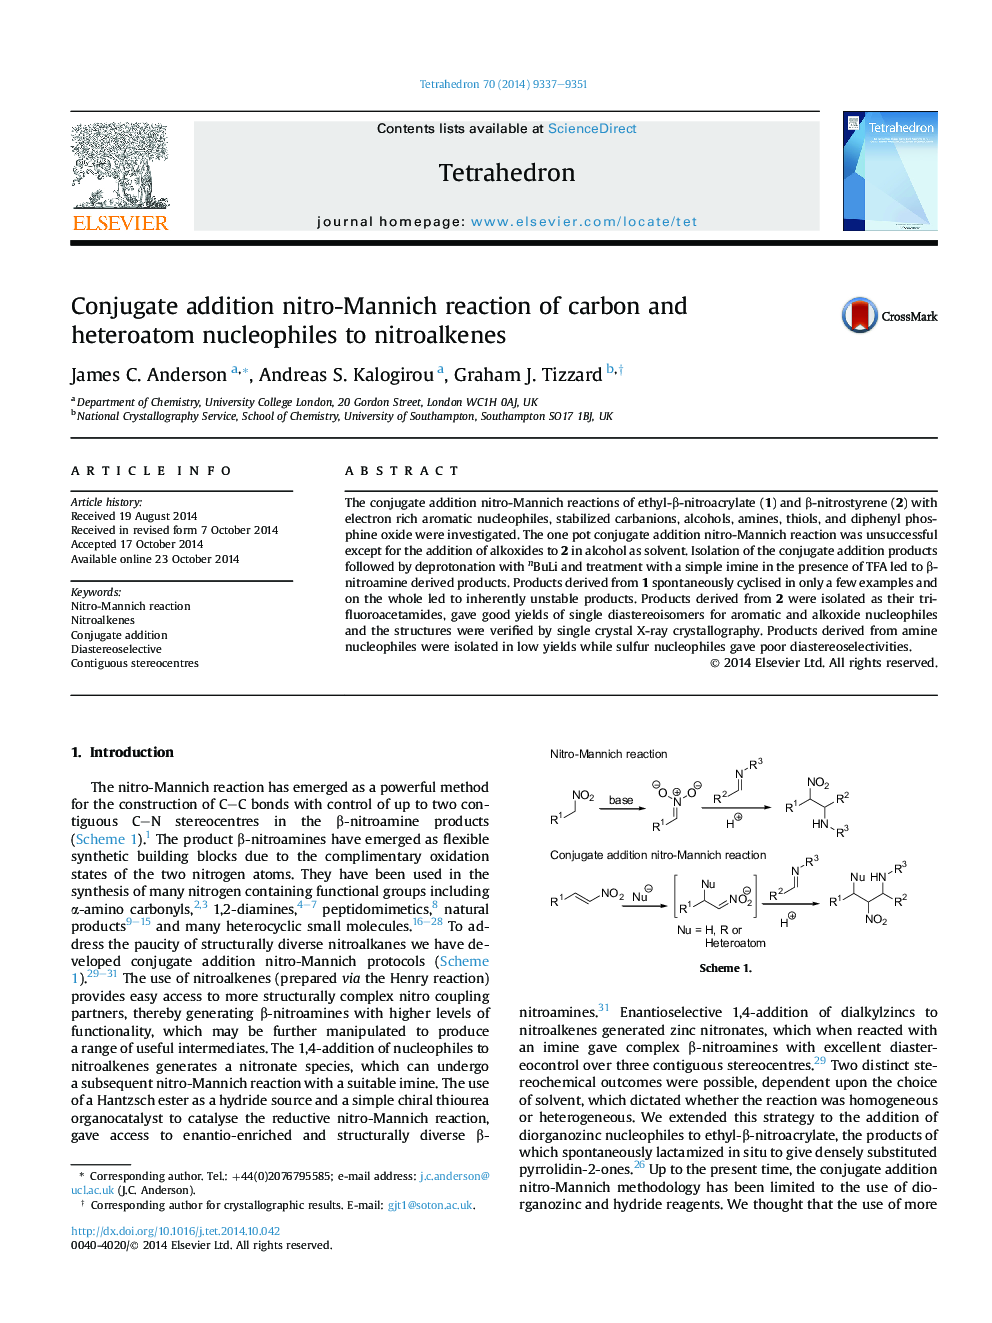 Conjugate addition nitro-Mannich reaction of carbon and heteroatom nucleophiles to nitroalkenes